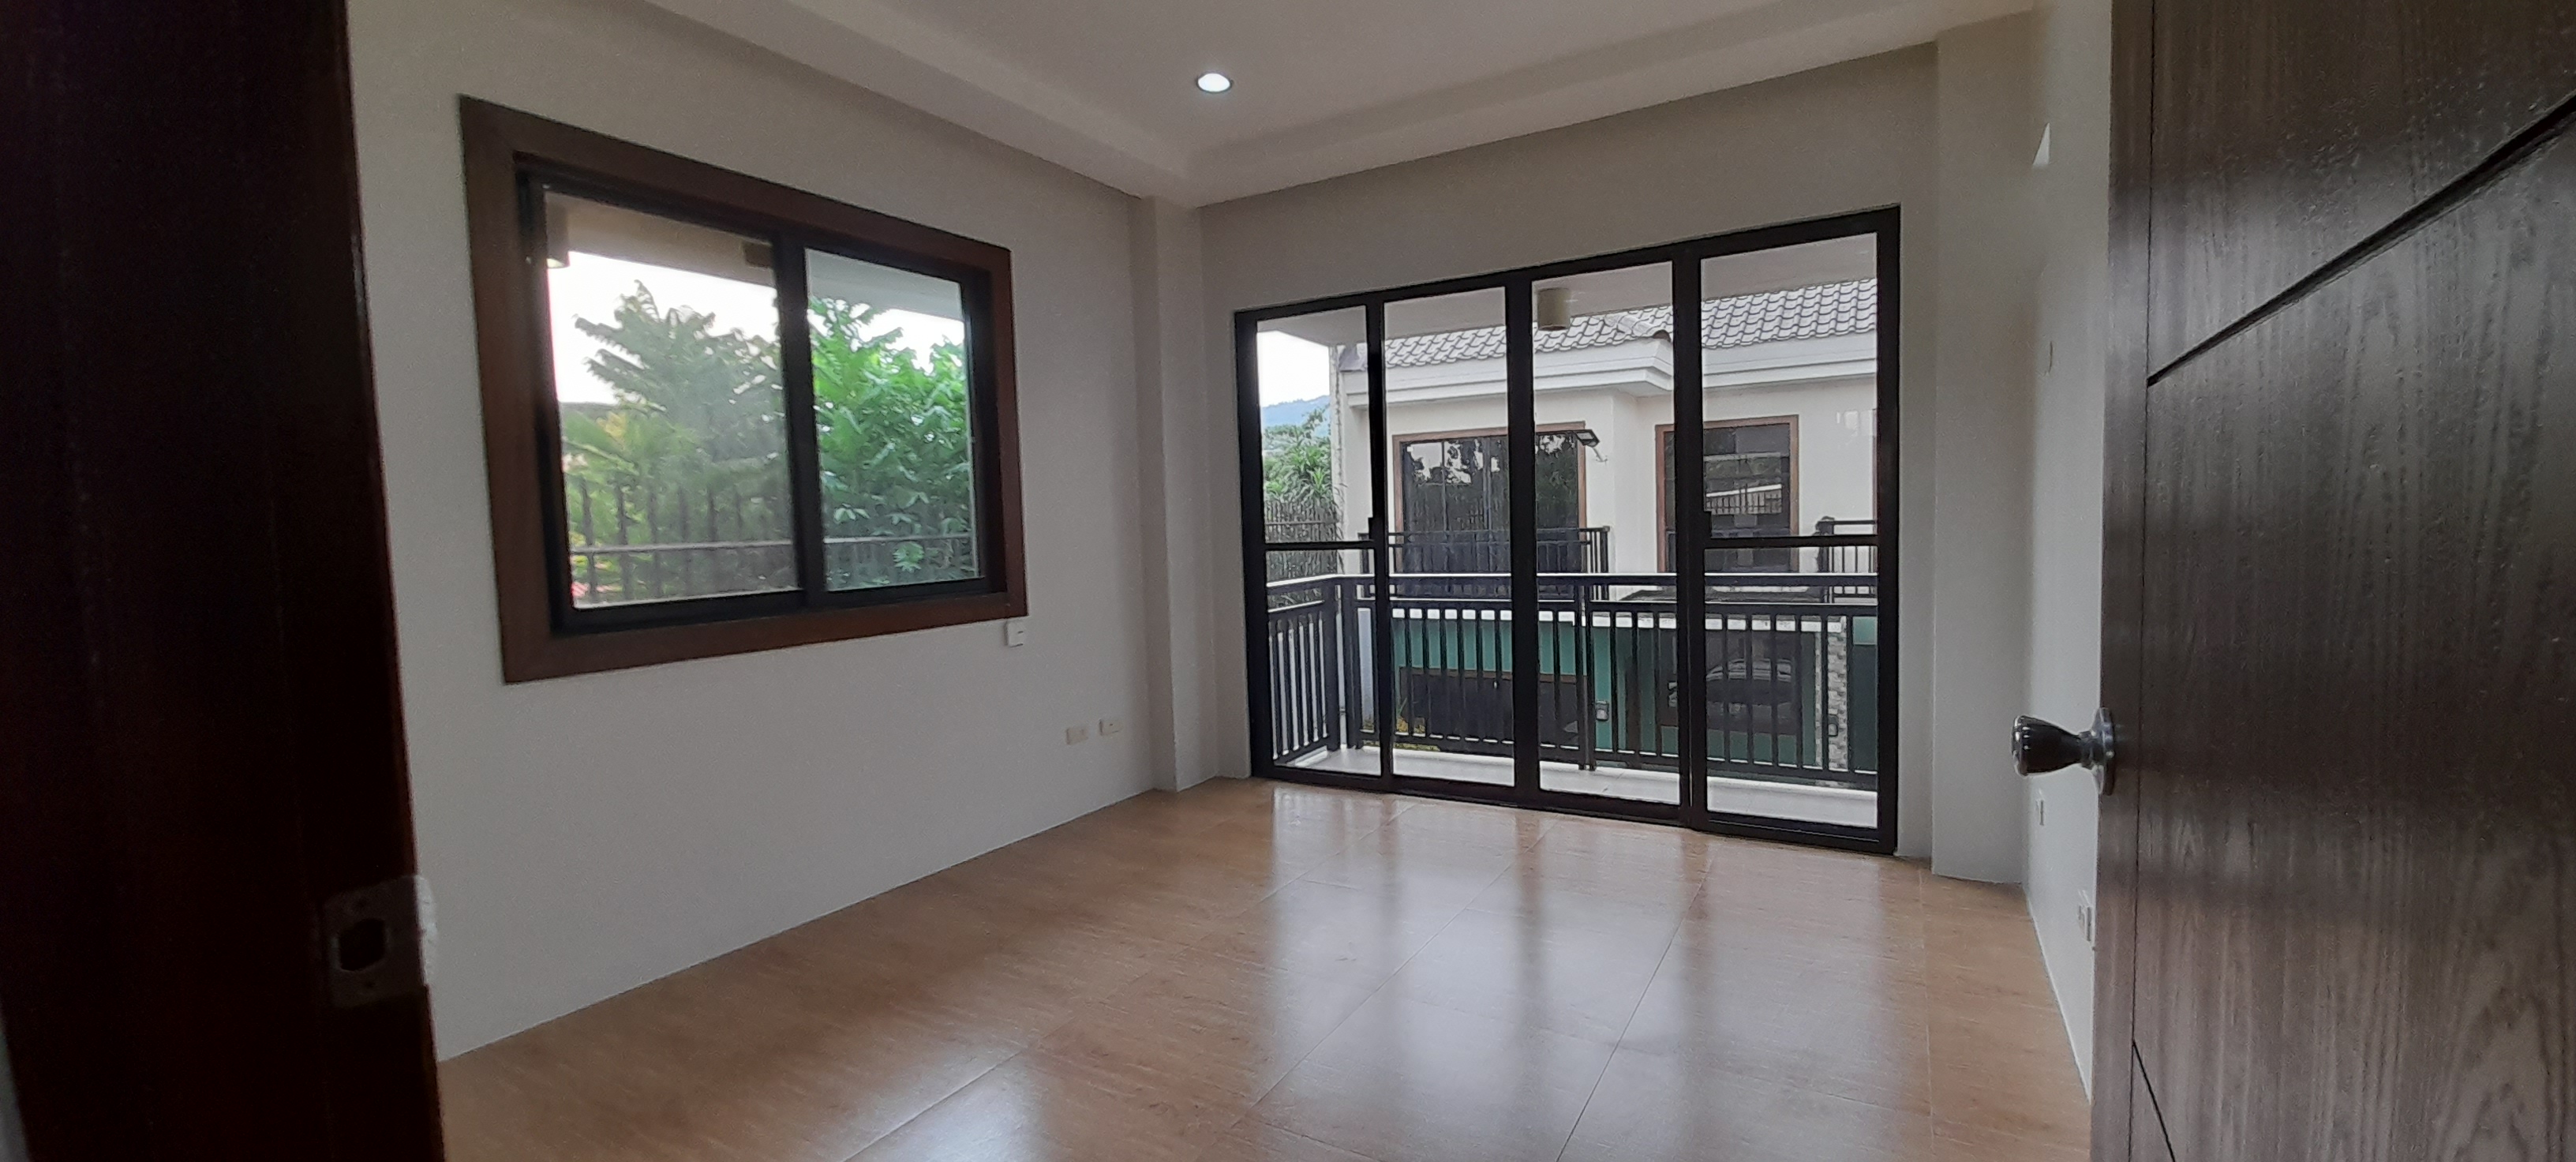 3-bedrooms-semi-furnished-apartment-in-guadalupe-cebu-city